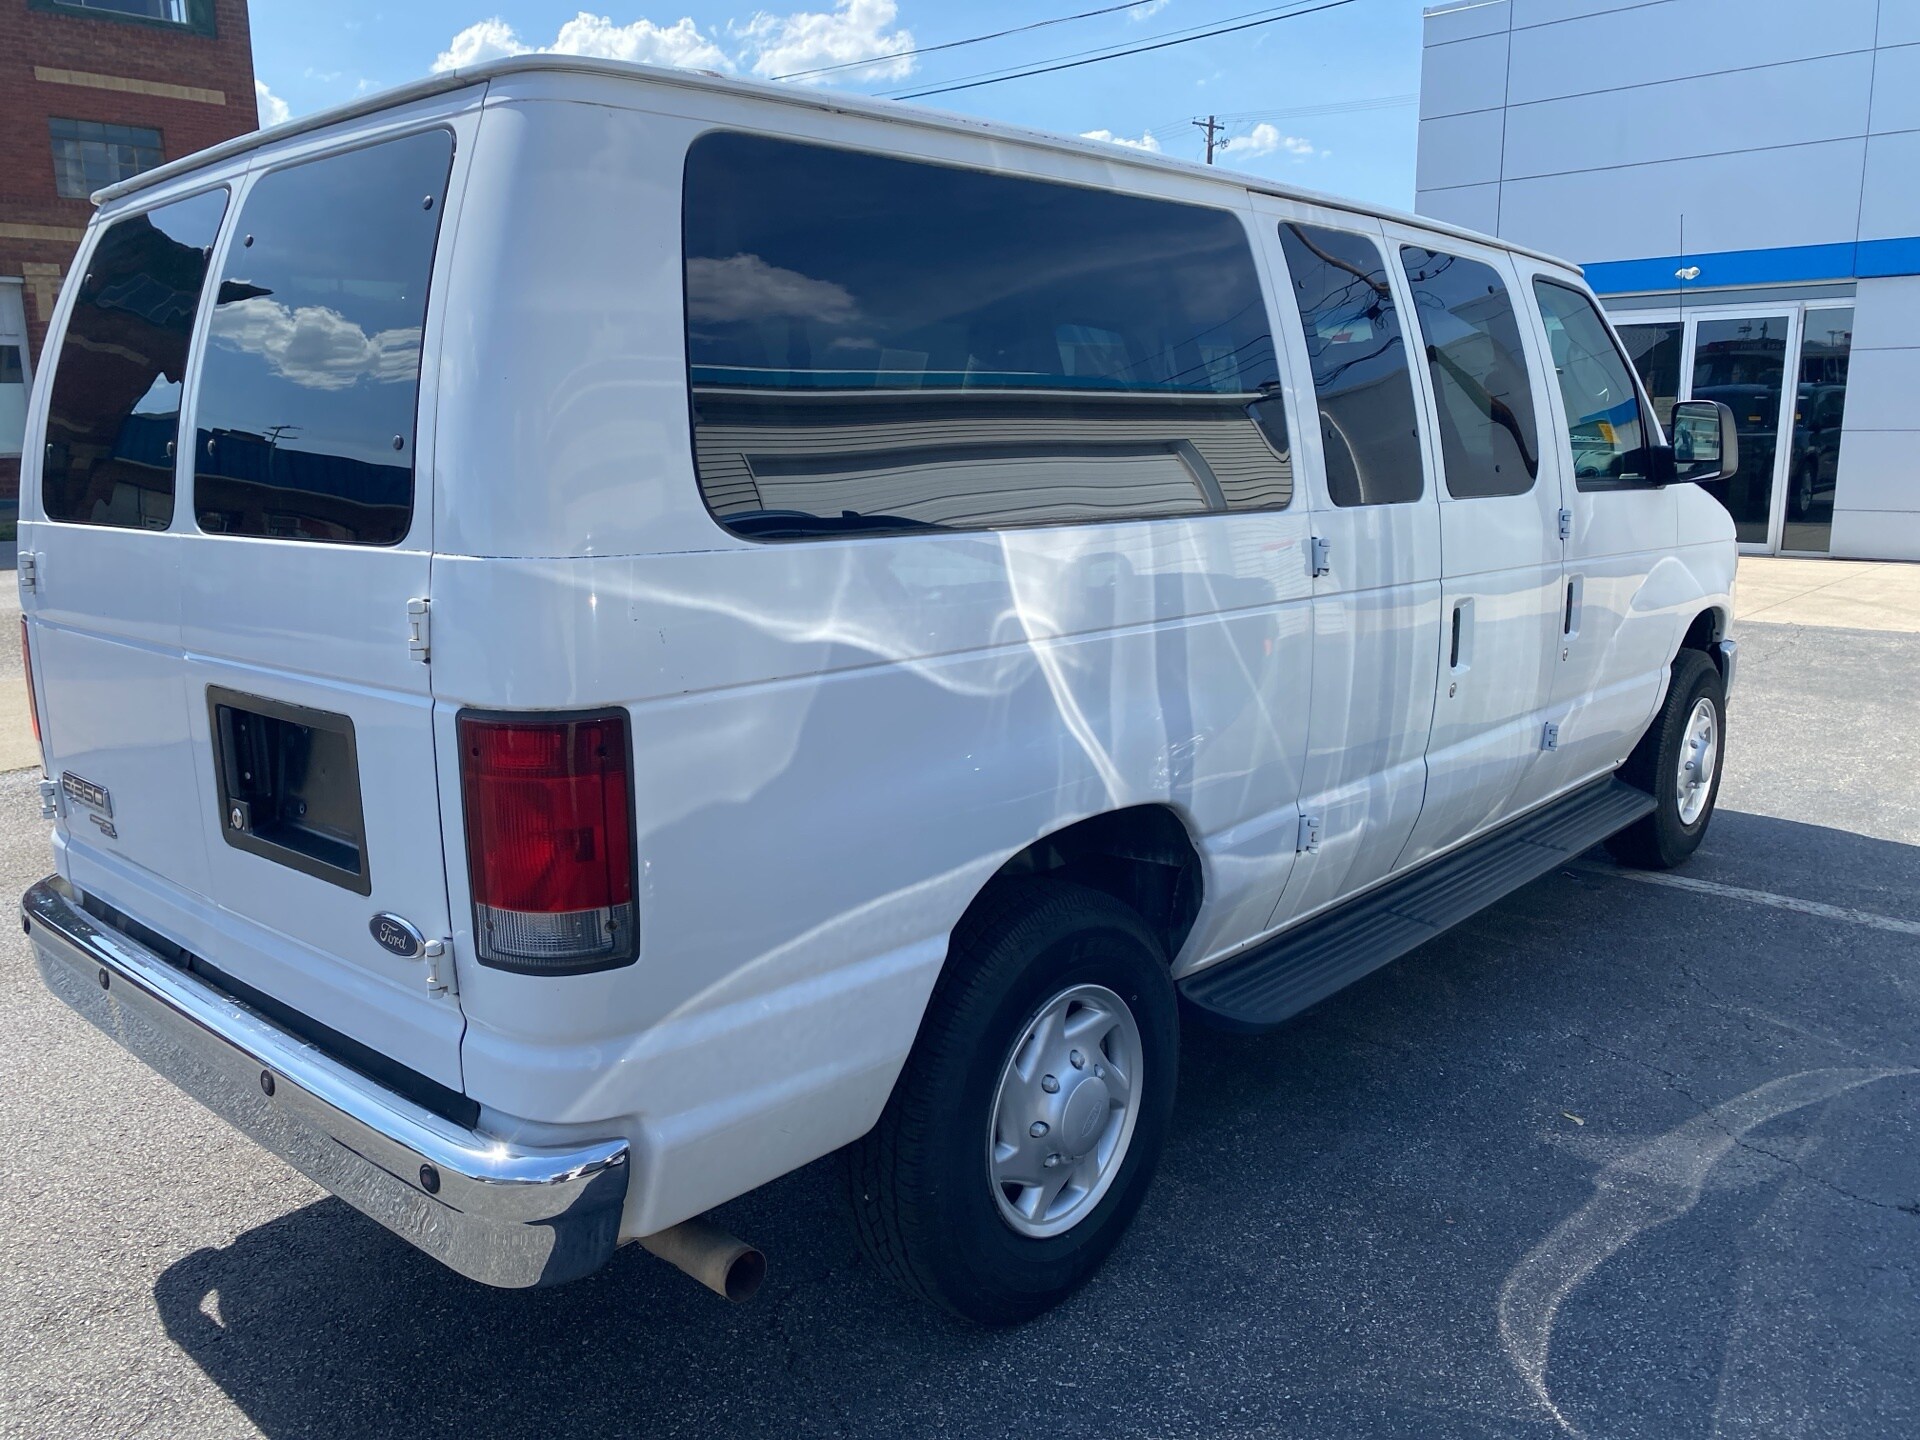 Used 2008 Ford E-Series Econoline Wagon XLT with VIN 1FBNE31L98DA81820 for sale in Ironton, OH